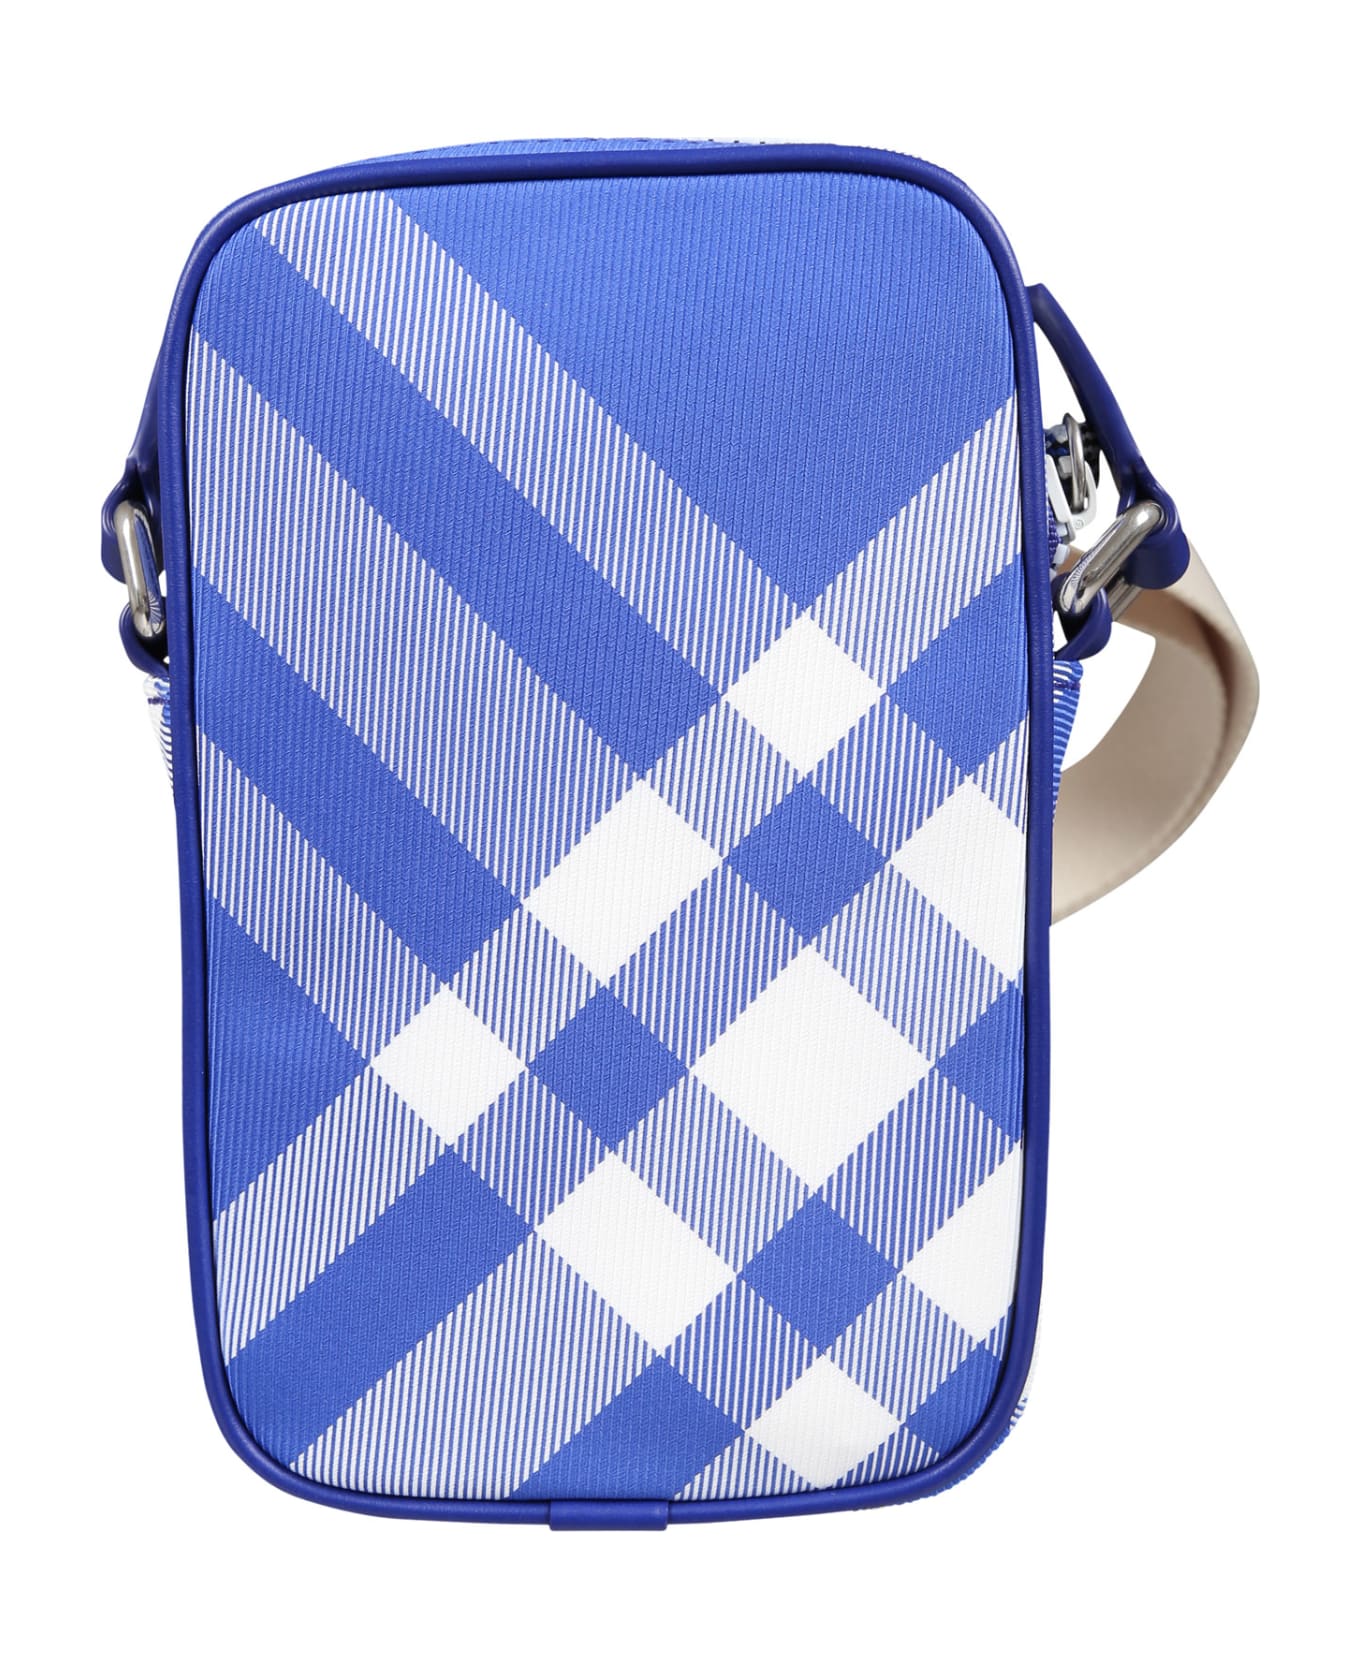 Burberry Blue Bag For Kids With Check - Blue アクセサリー＆ギフト